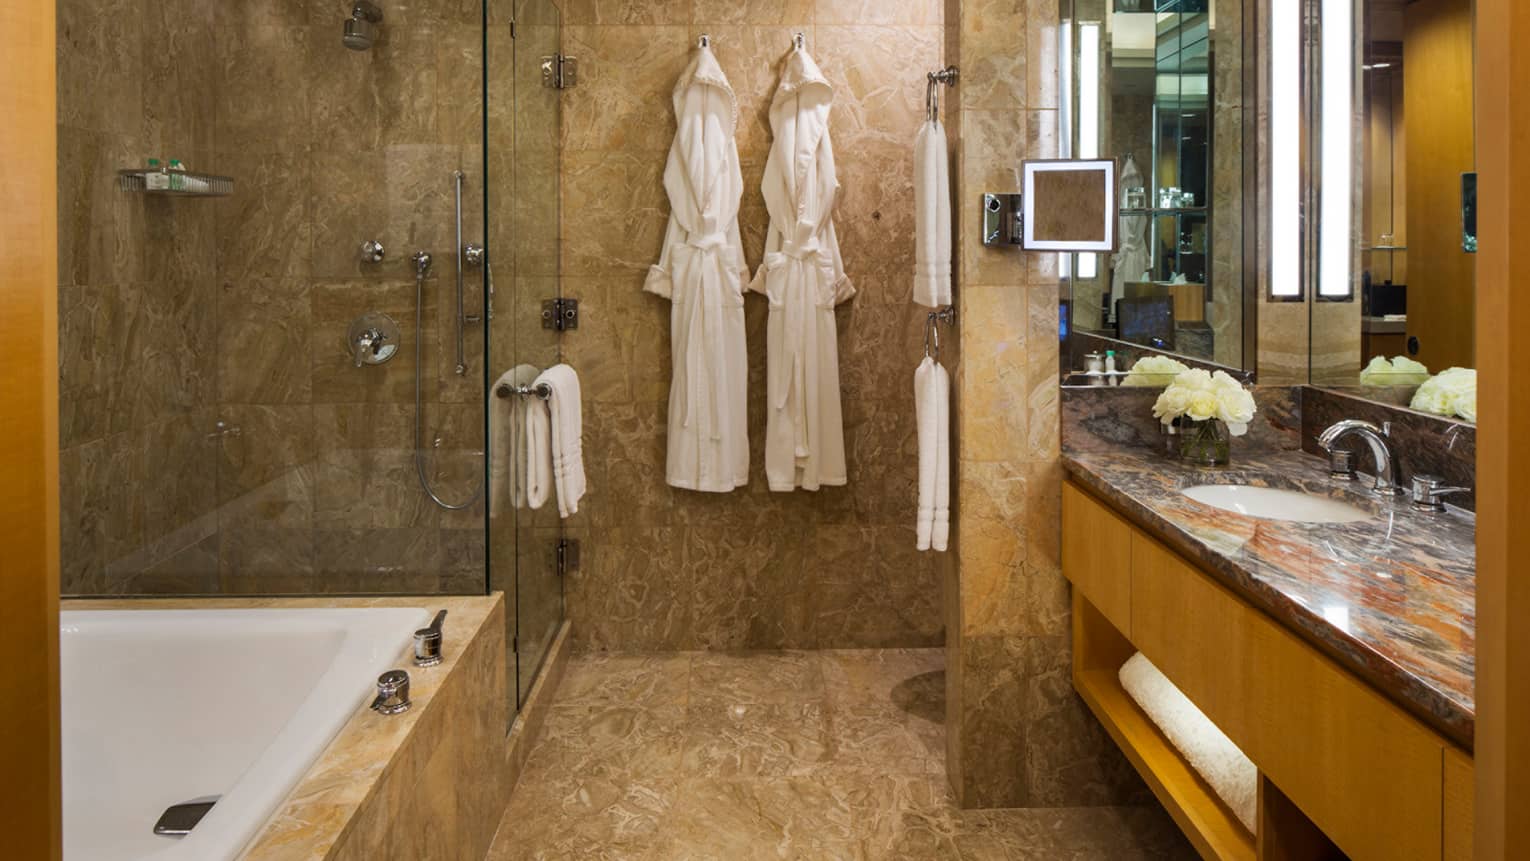 Gotham Suite bathroom, two white robes hanging on wall by walk-in glass shower, tub